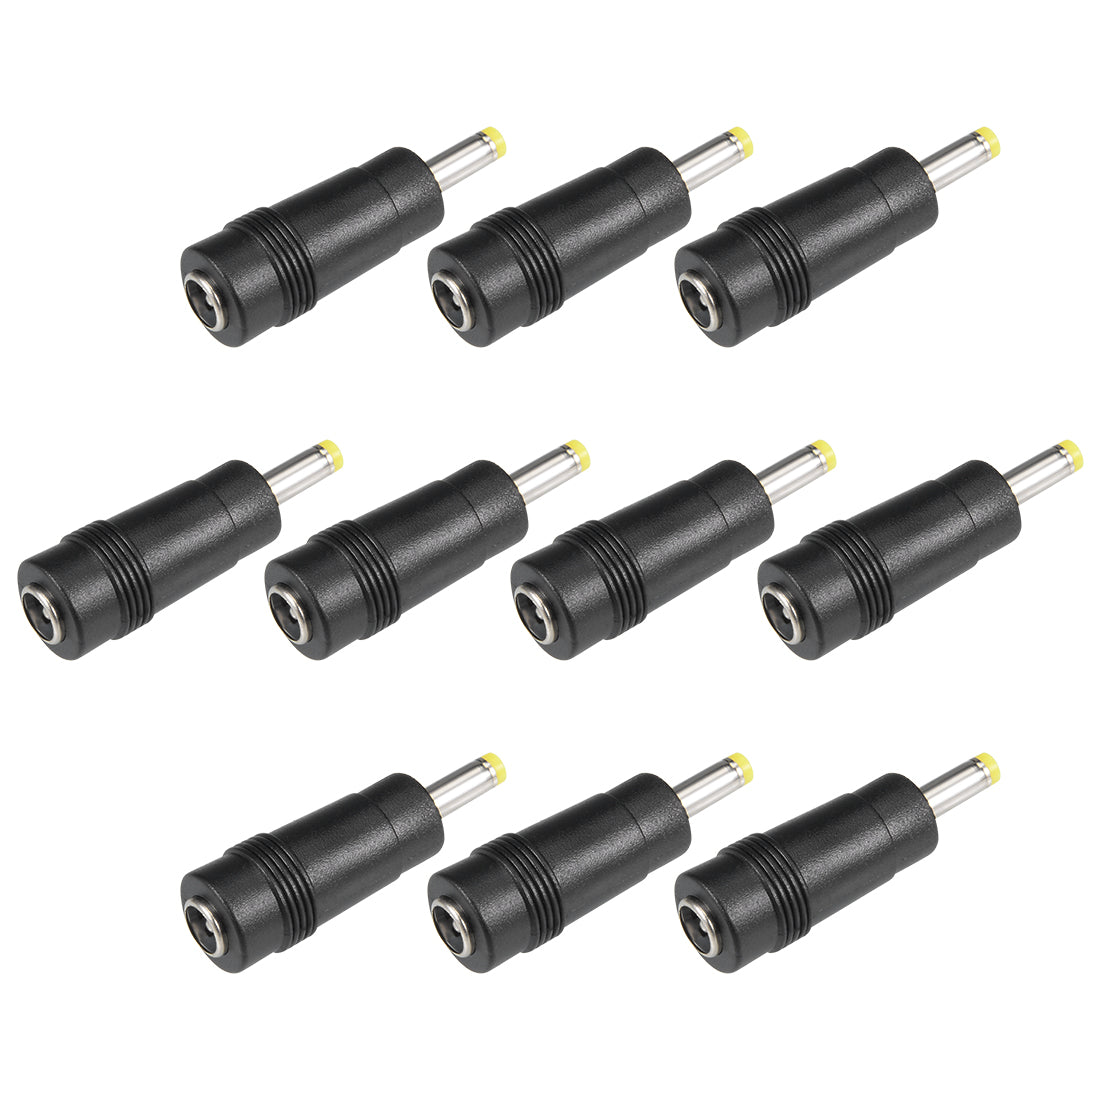 uxcell Uxcell 10 Pcs Copper DC Power Connector 5.5mmx2.1mm Female to 4.0mmx1.7mm Male Adapter